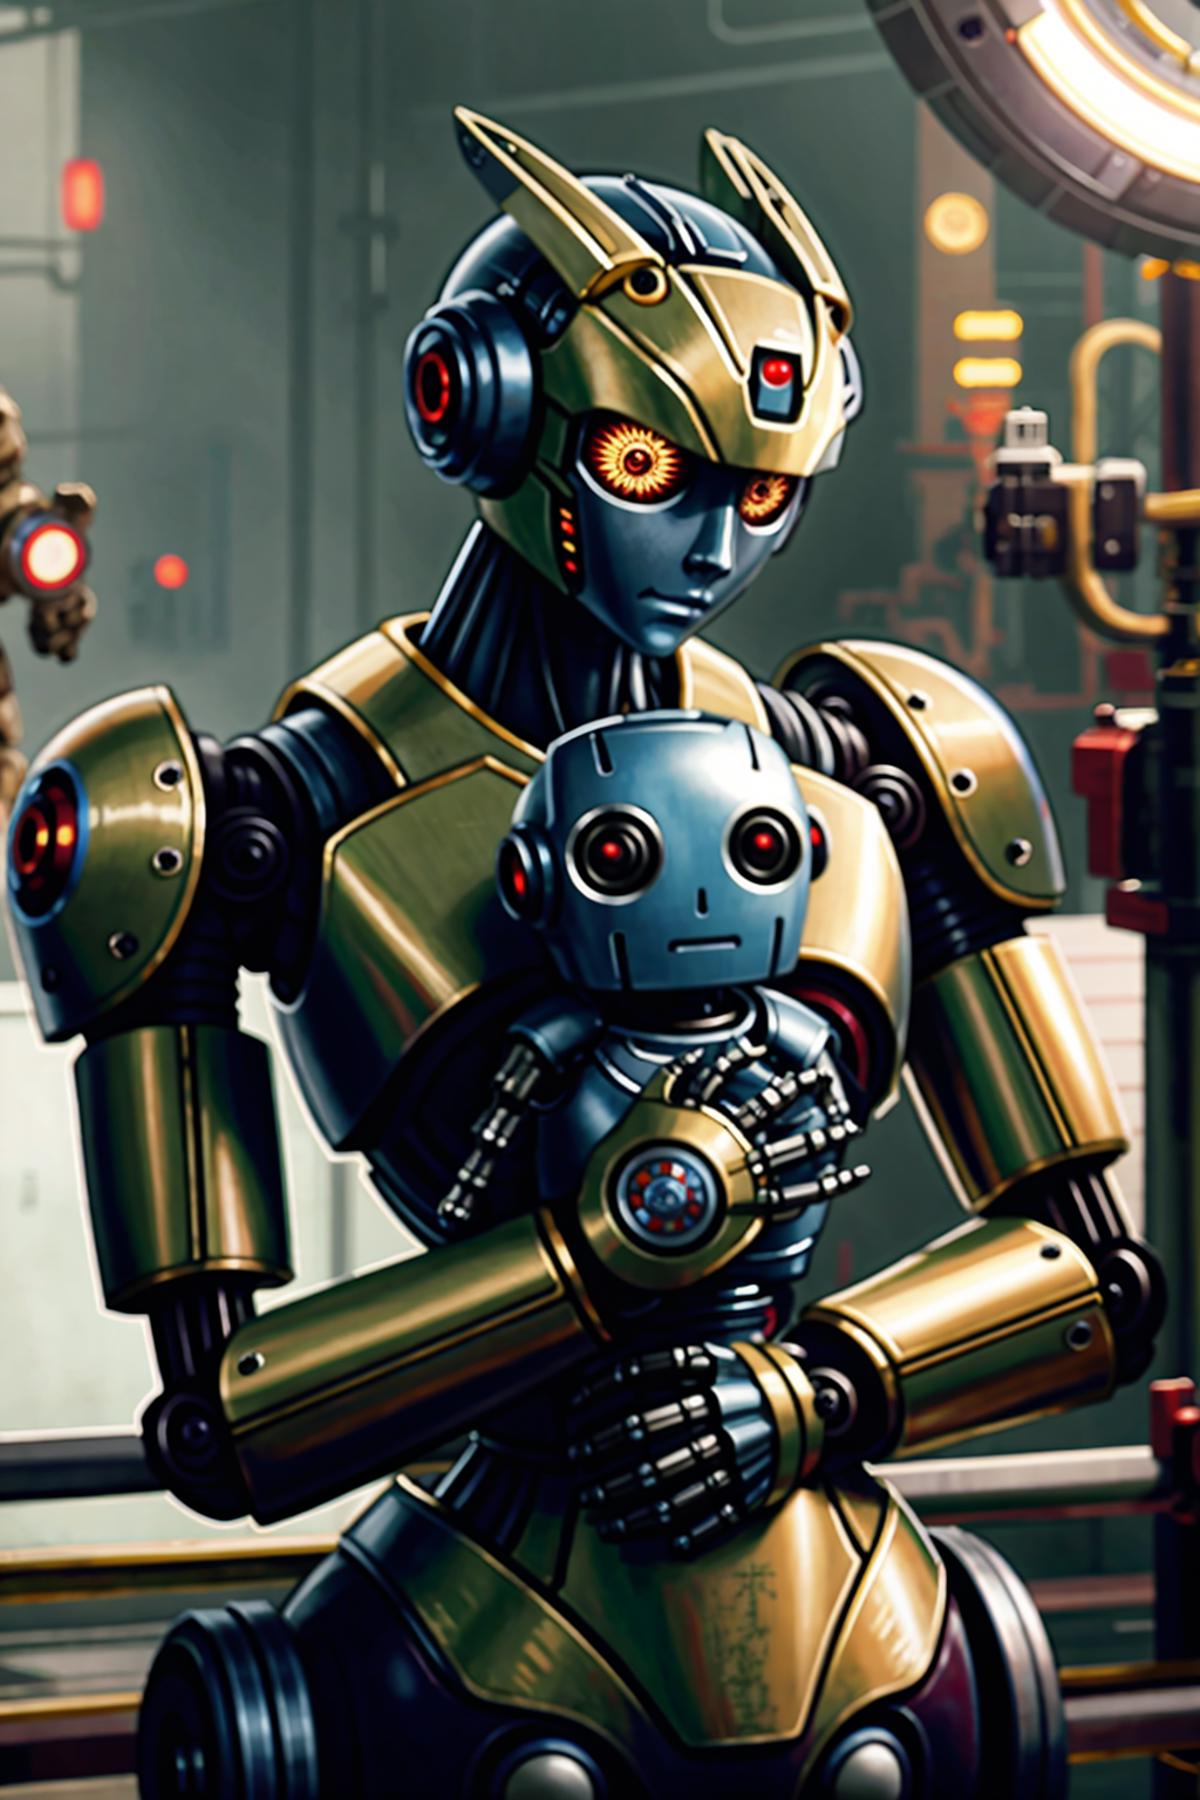 A robot holding a robotic baby in a factory setting.